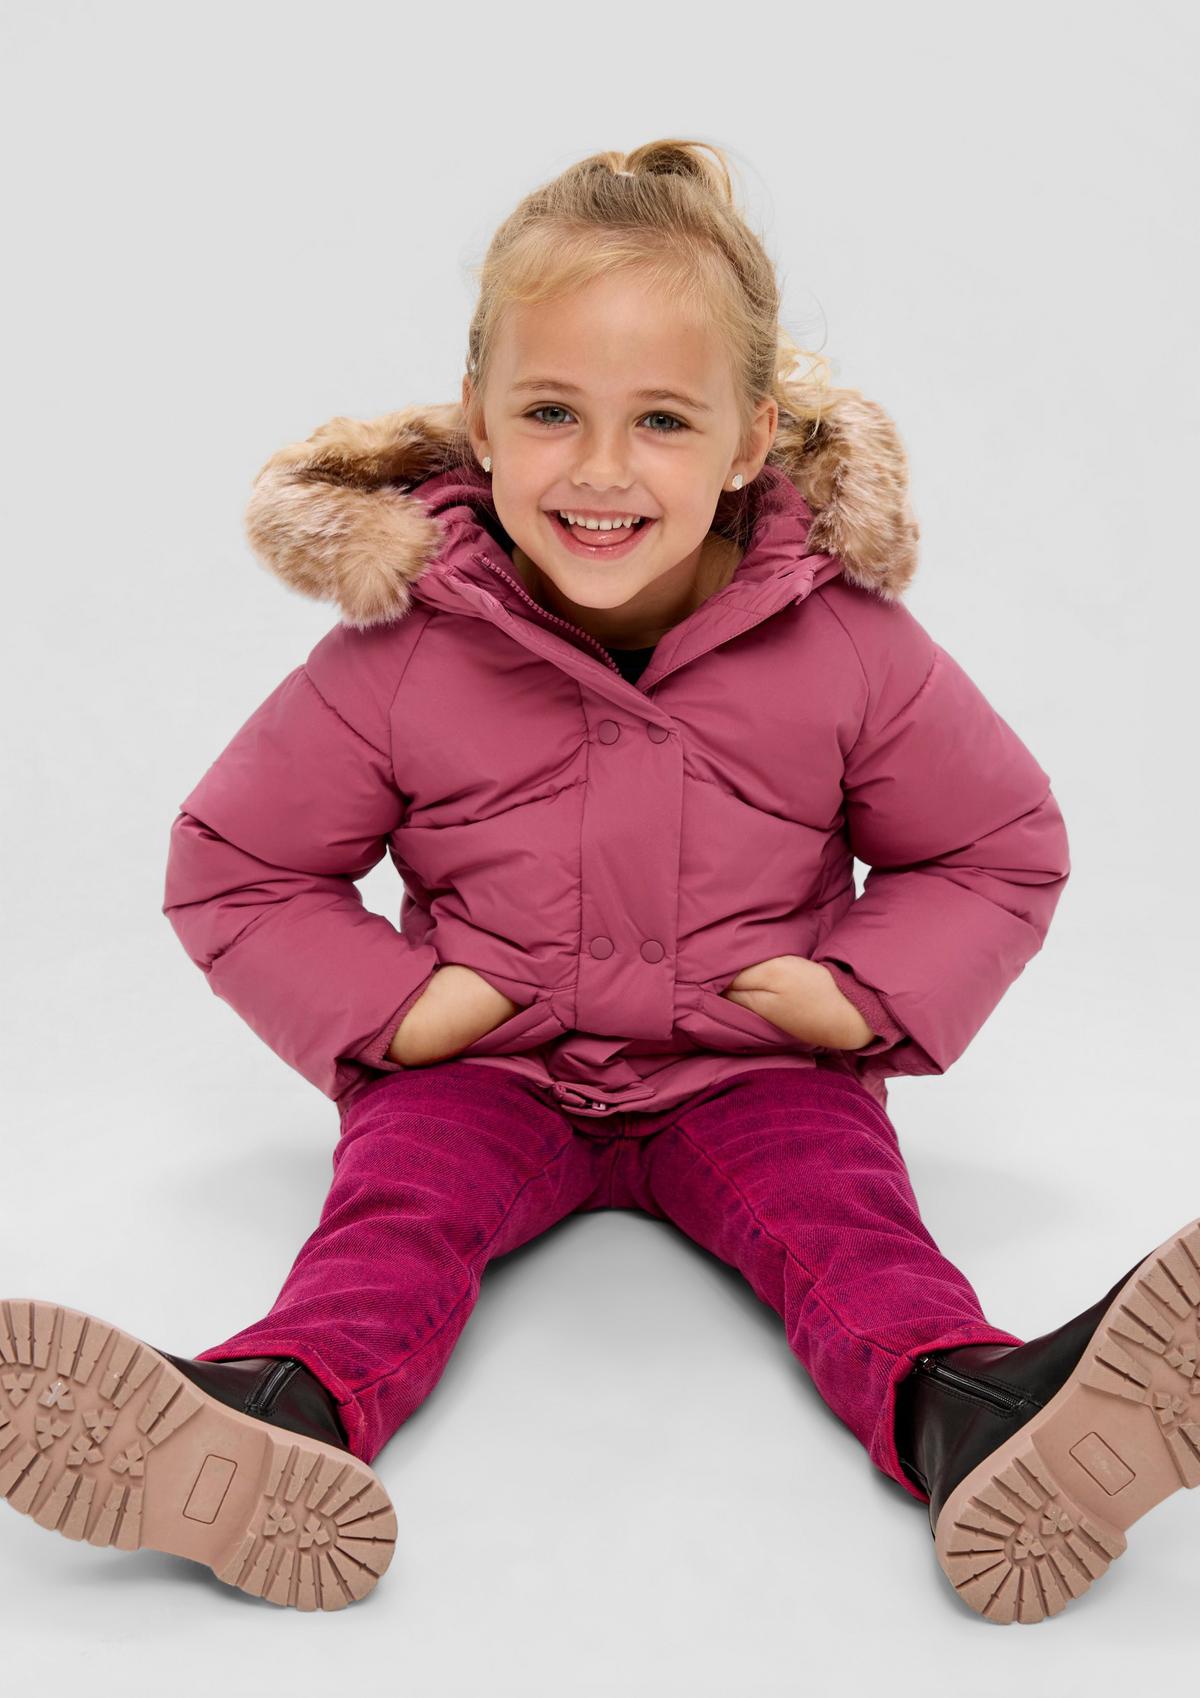 Kids' fashion and clothing for girls and boys